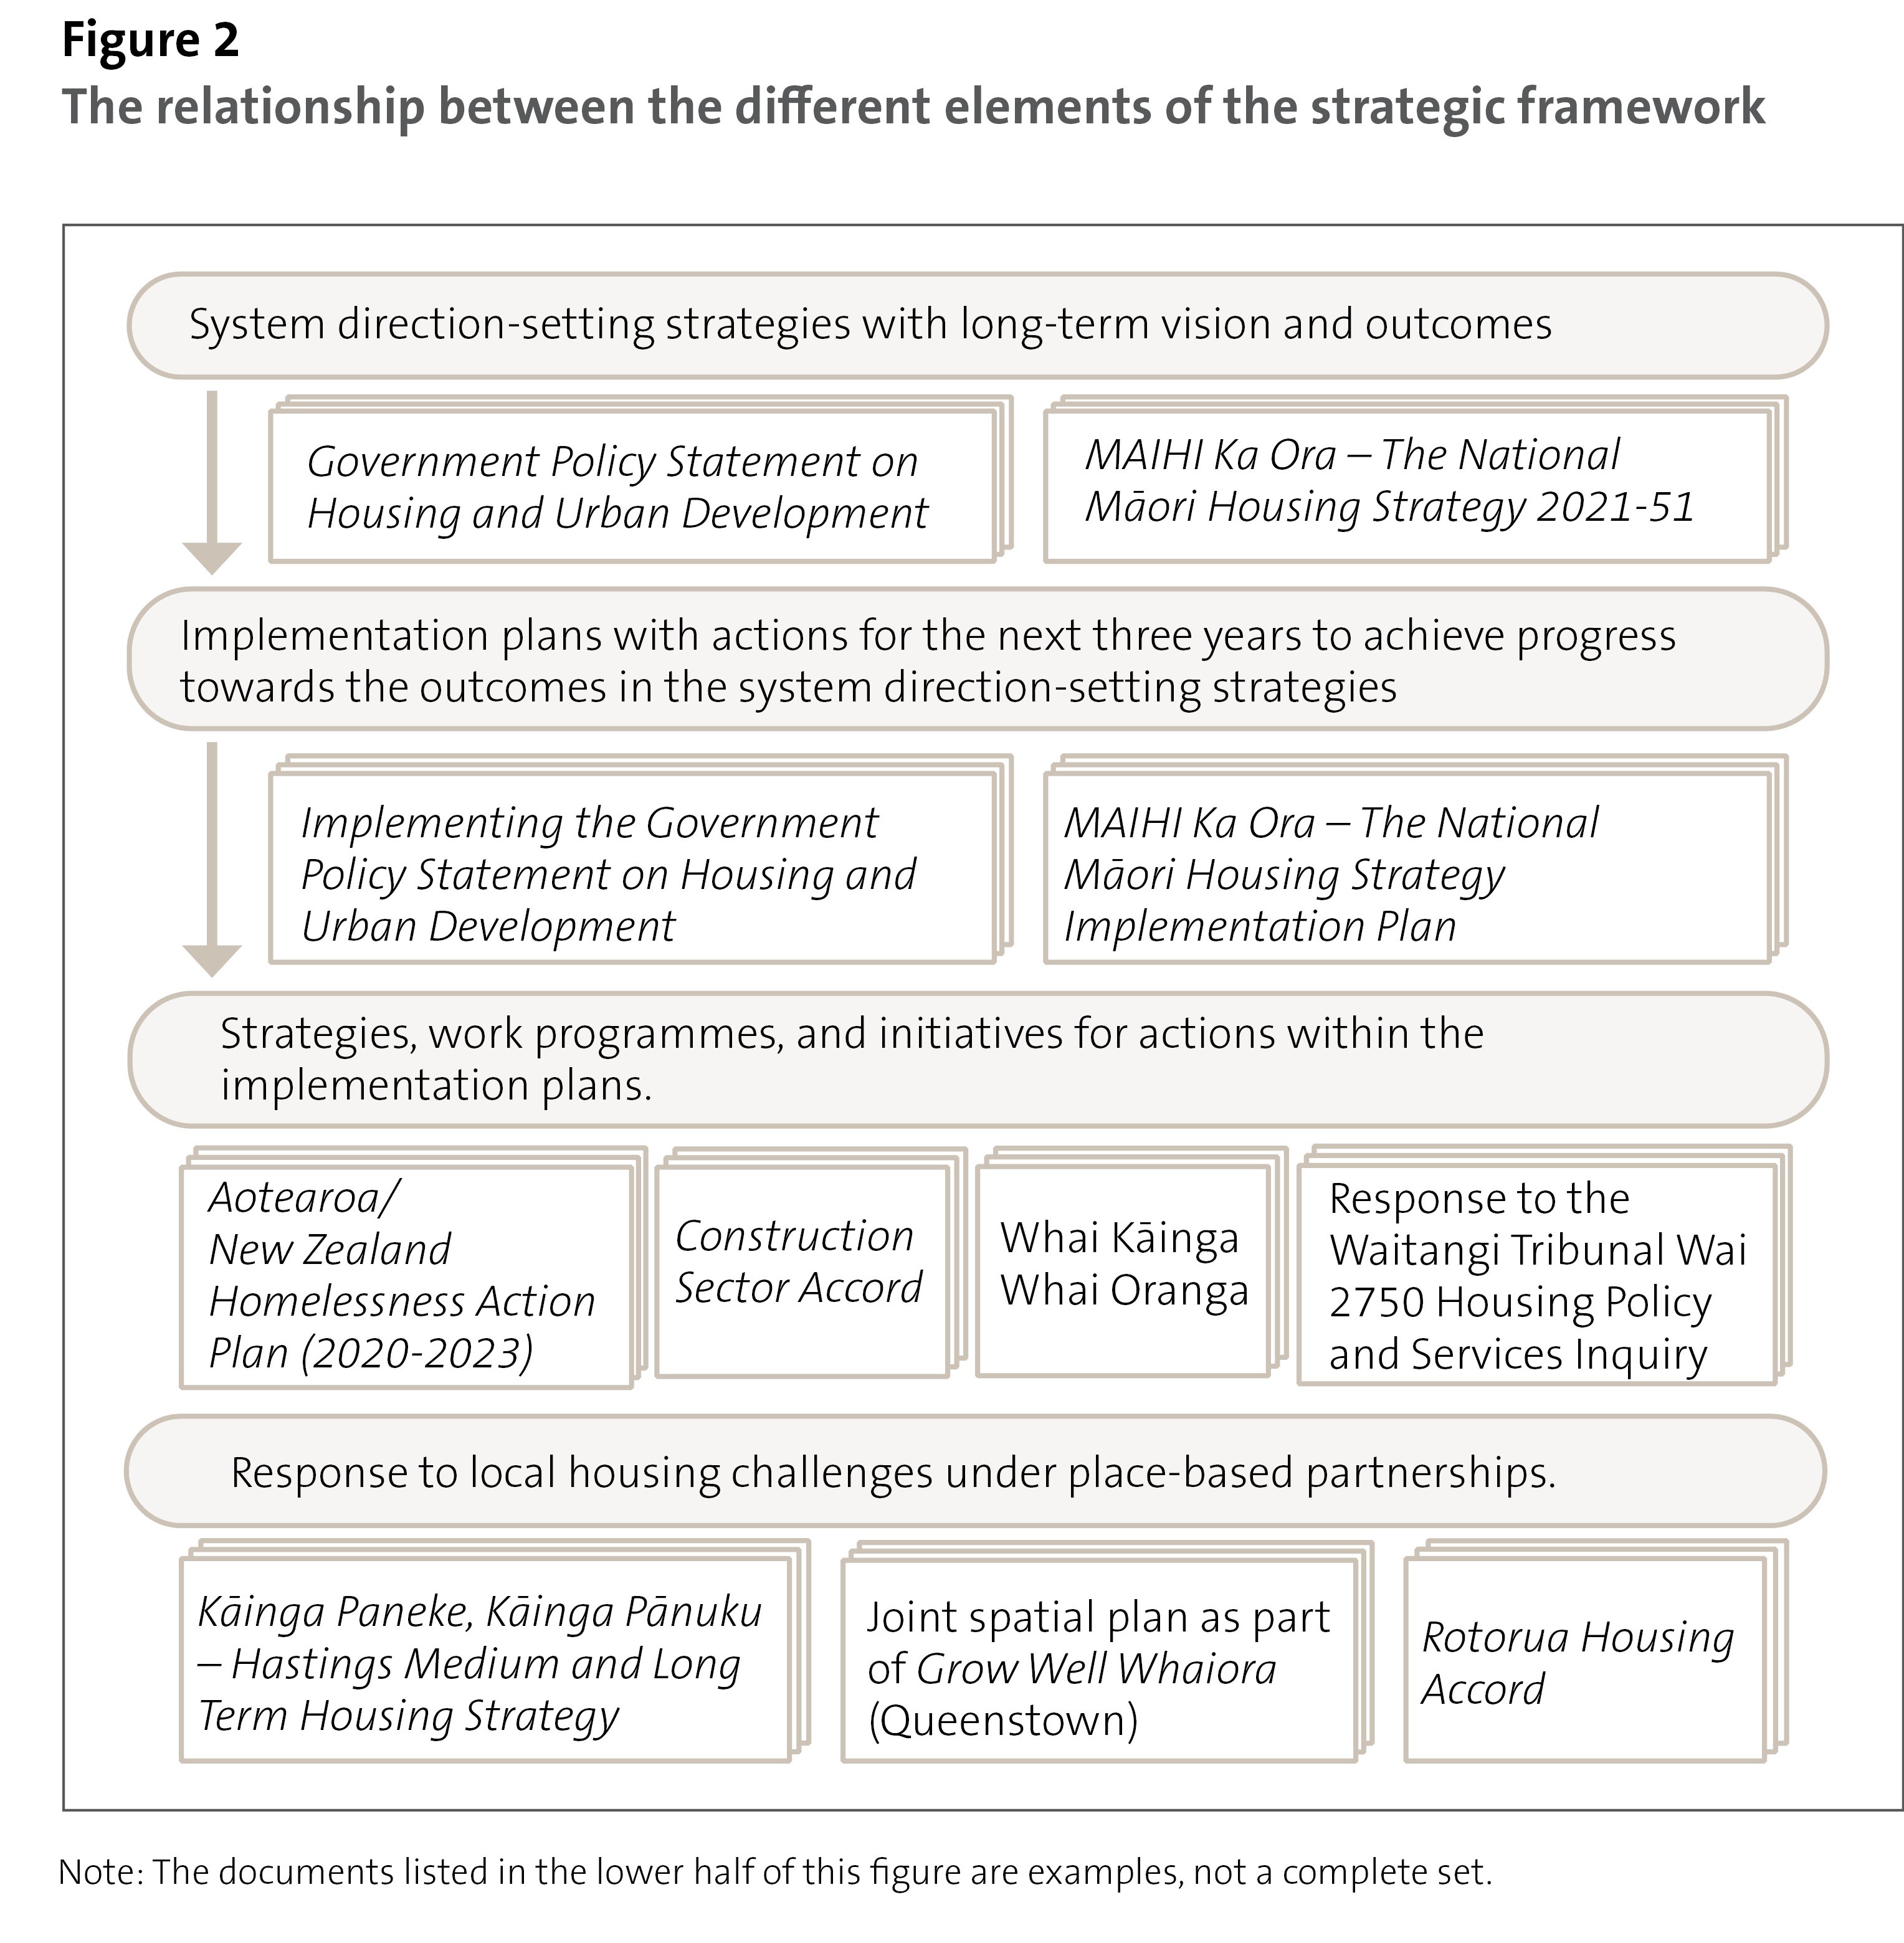 Figure 2: The relationship between the different elements of the strategic framework